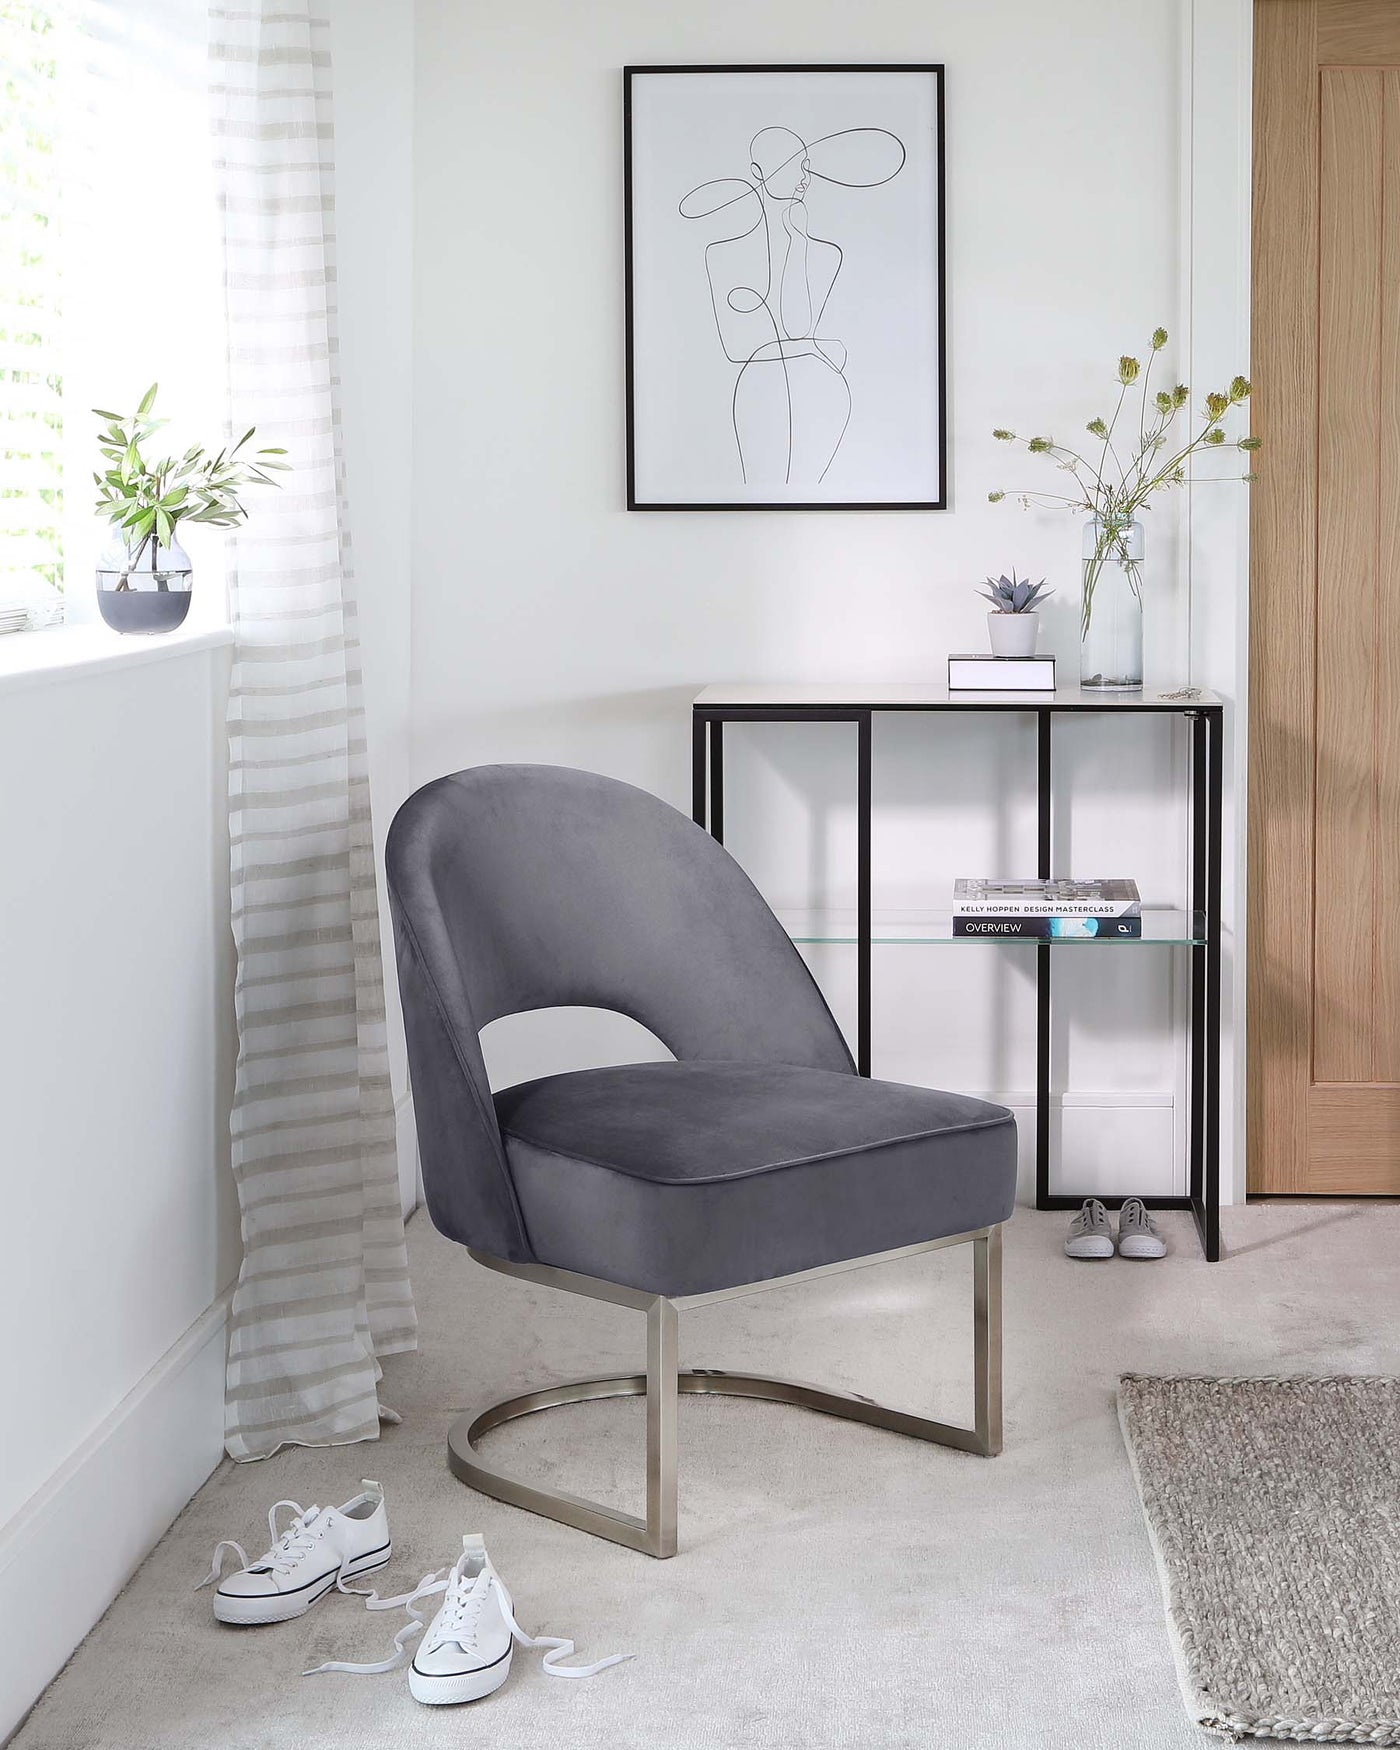 A modern grey upholstered chair with a curved backrest, a cut-out detail on the back, and a unique, symmetrical metal base in a matte finish. Also featured is a sleek, narrow black metal console table with glass shelves, displaying decorative items and books.